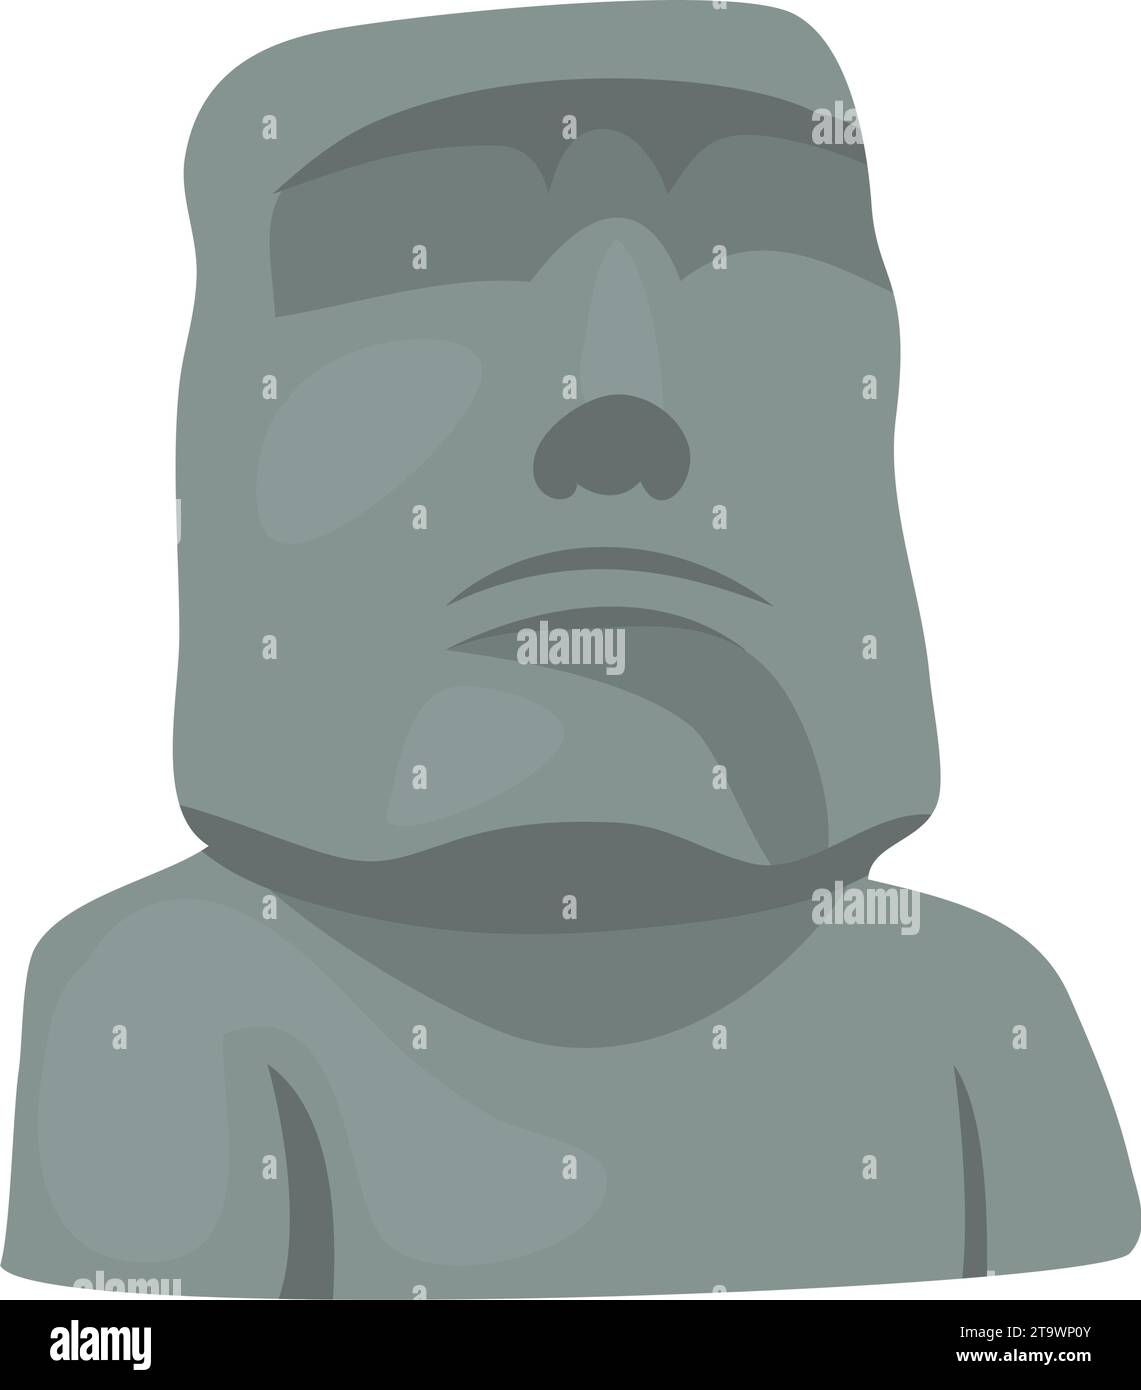 moai statue from chile Stock Vector